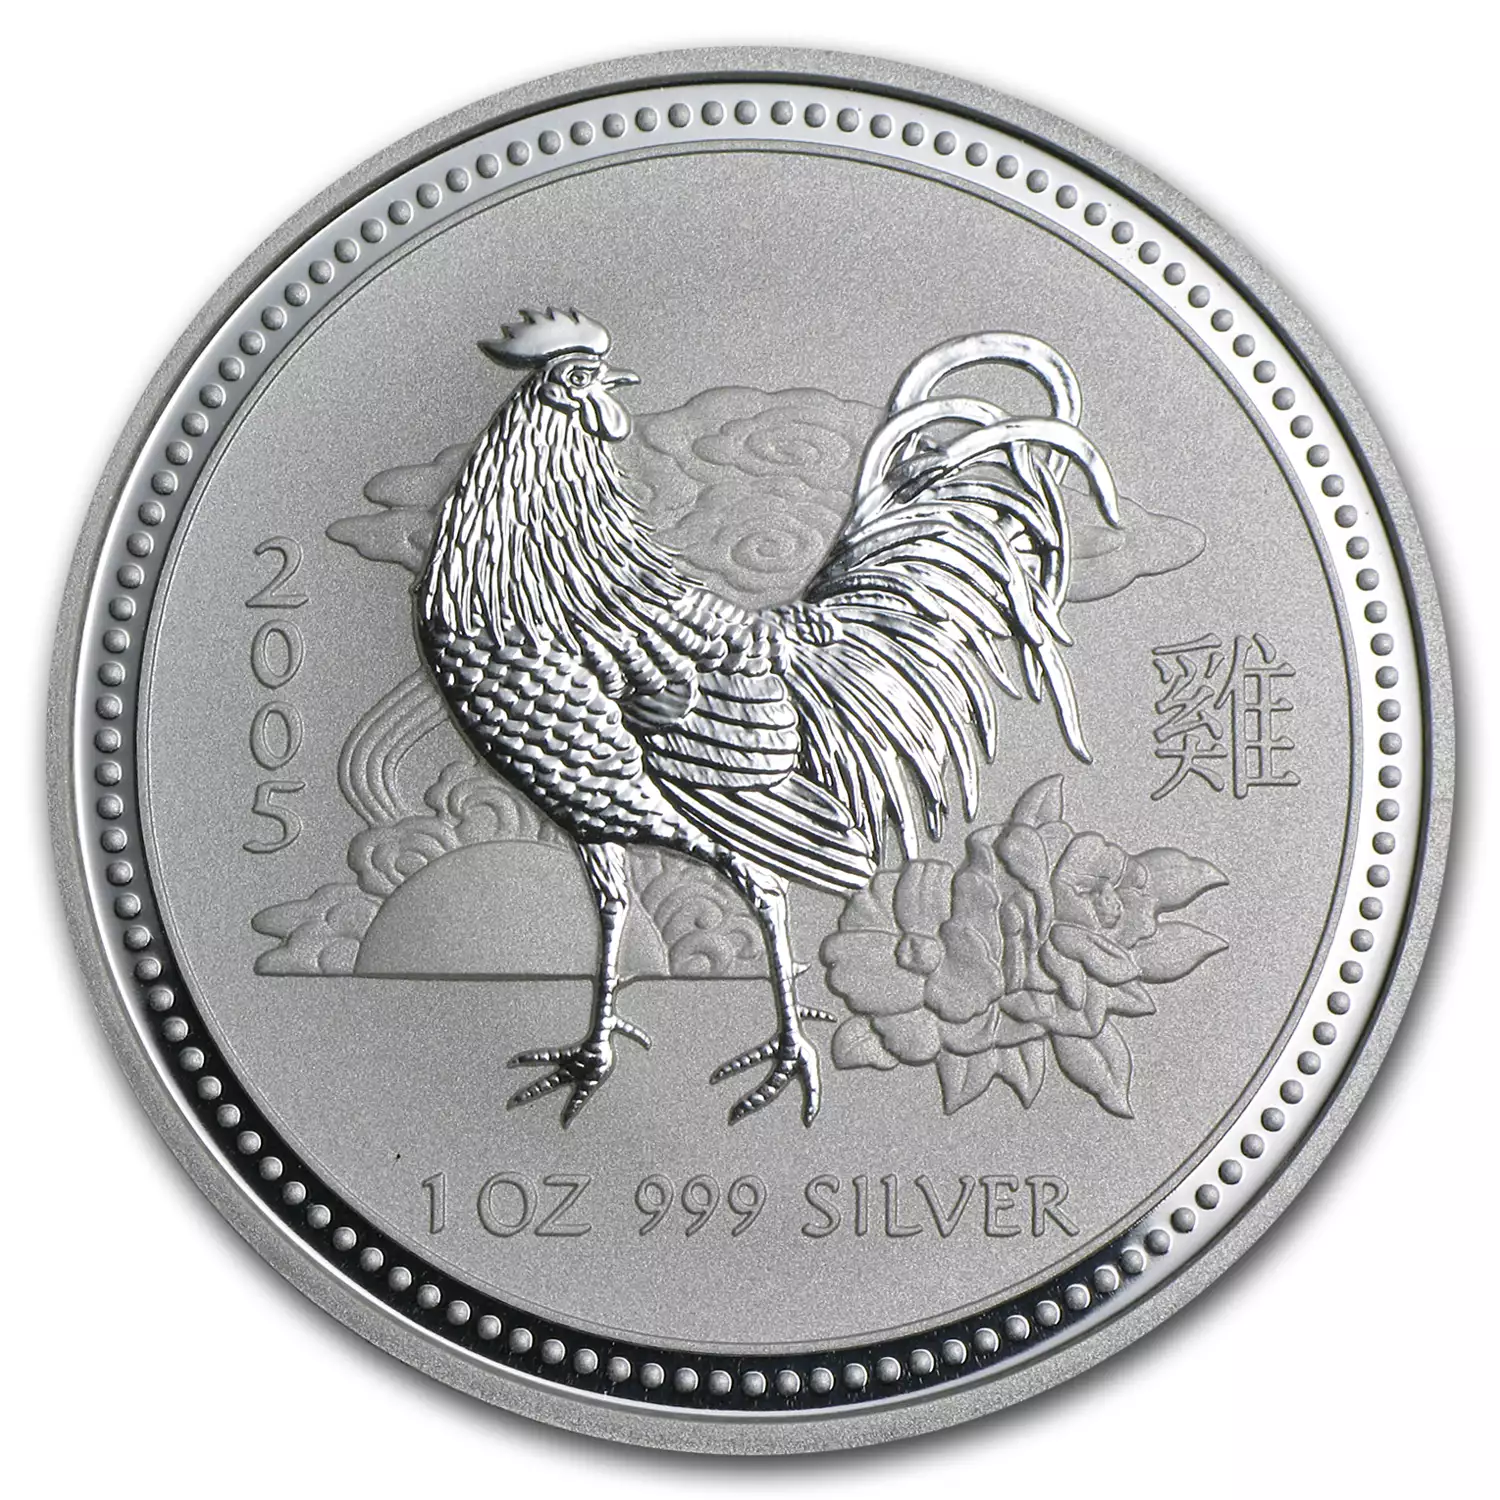 2005 1oz Australian Perth Mint Silver Lunar: Year of the Rooster (2)